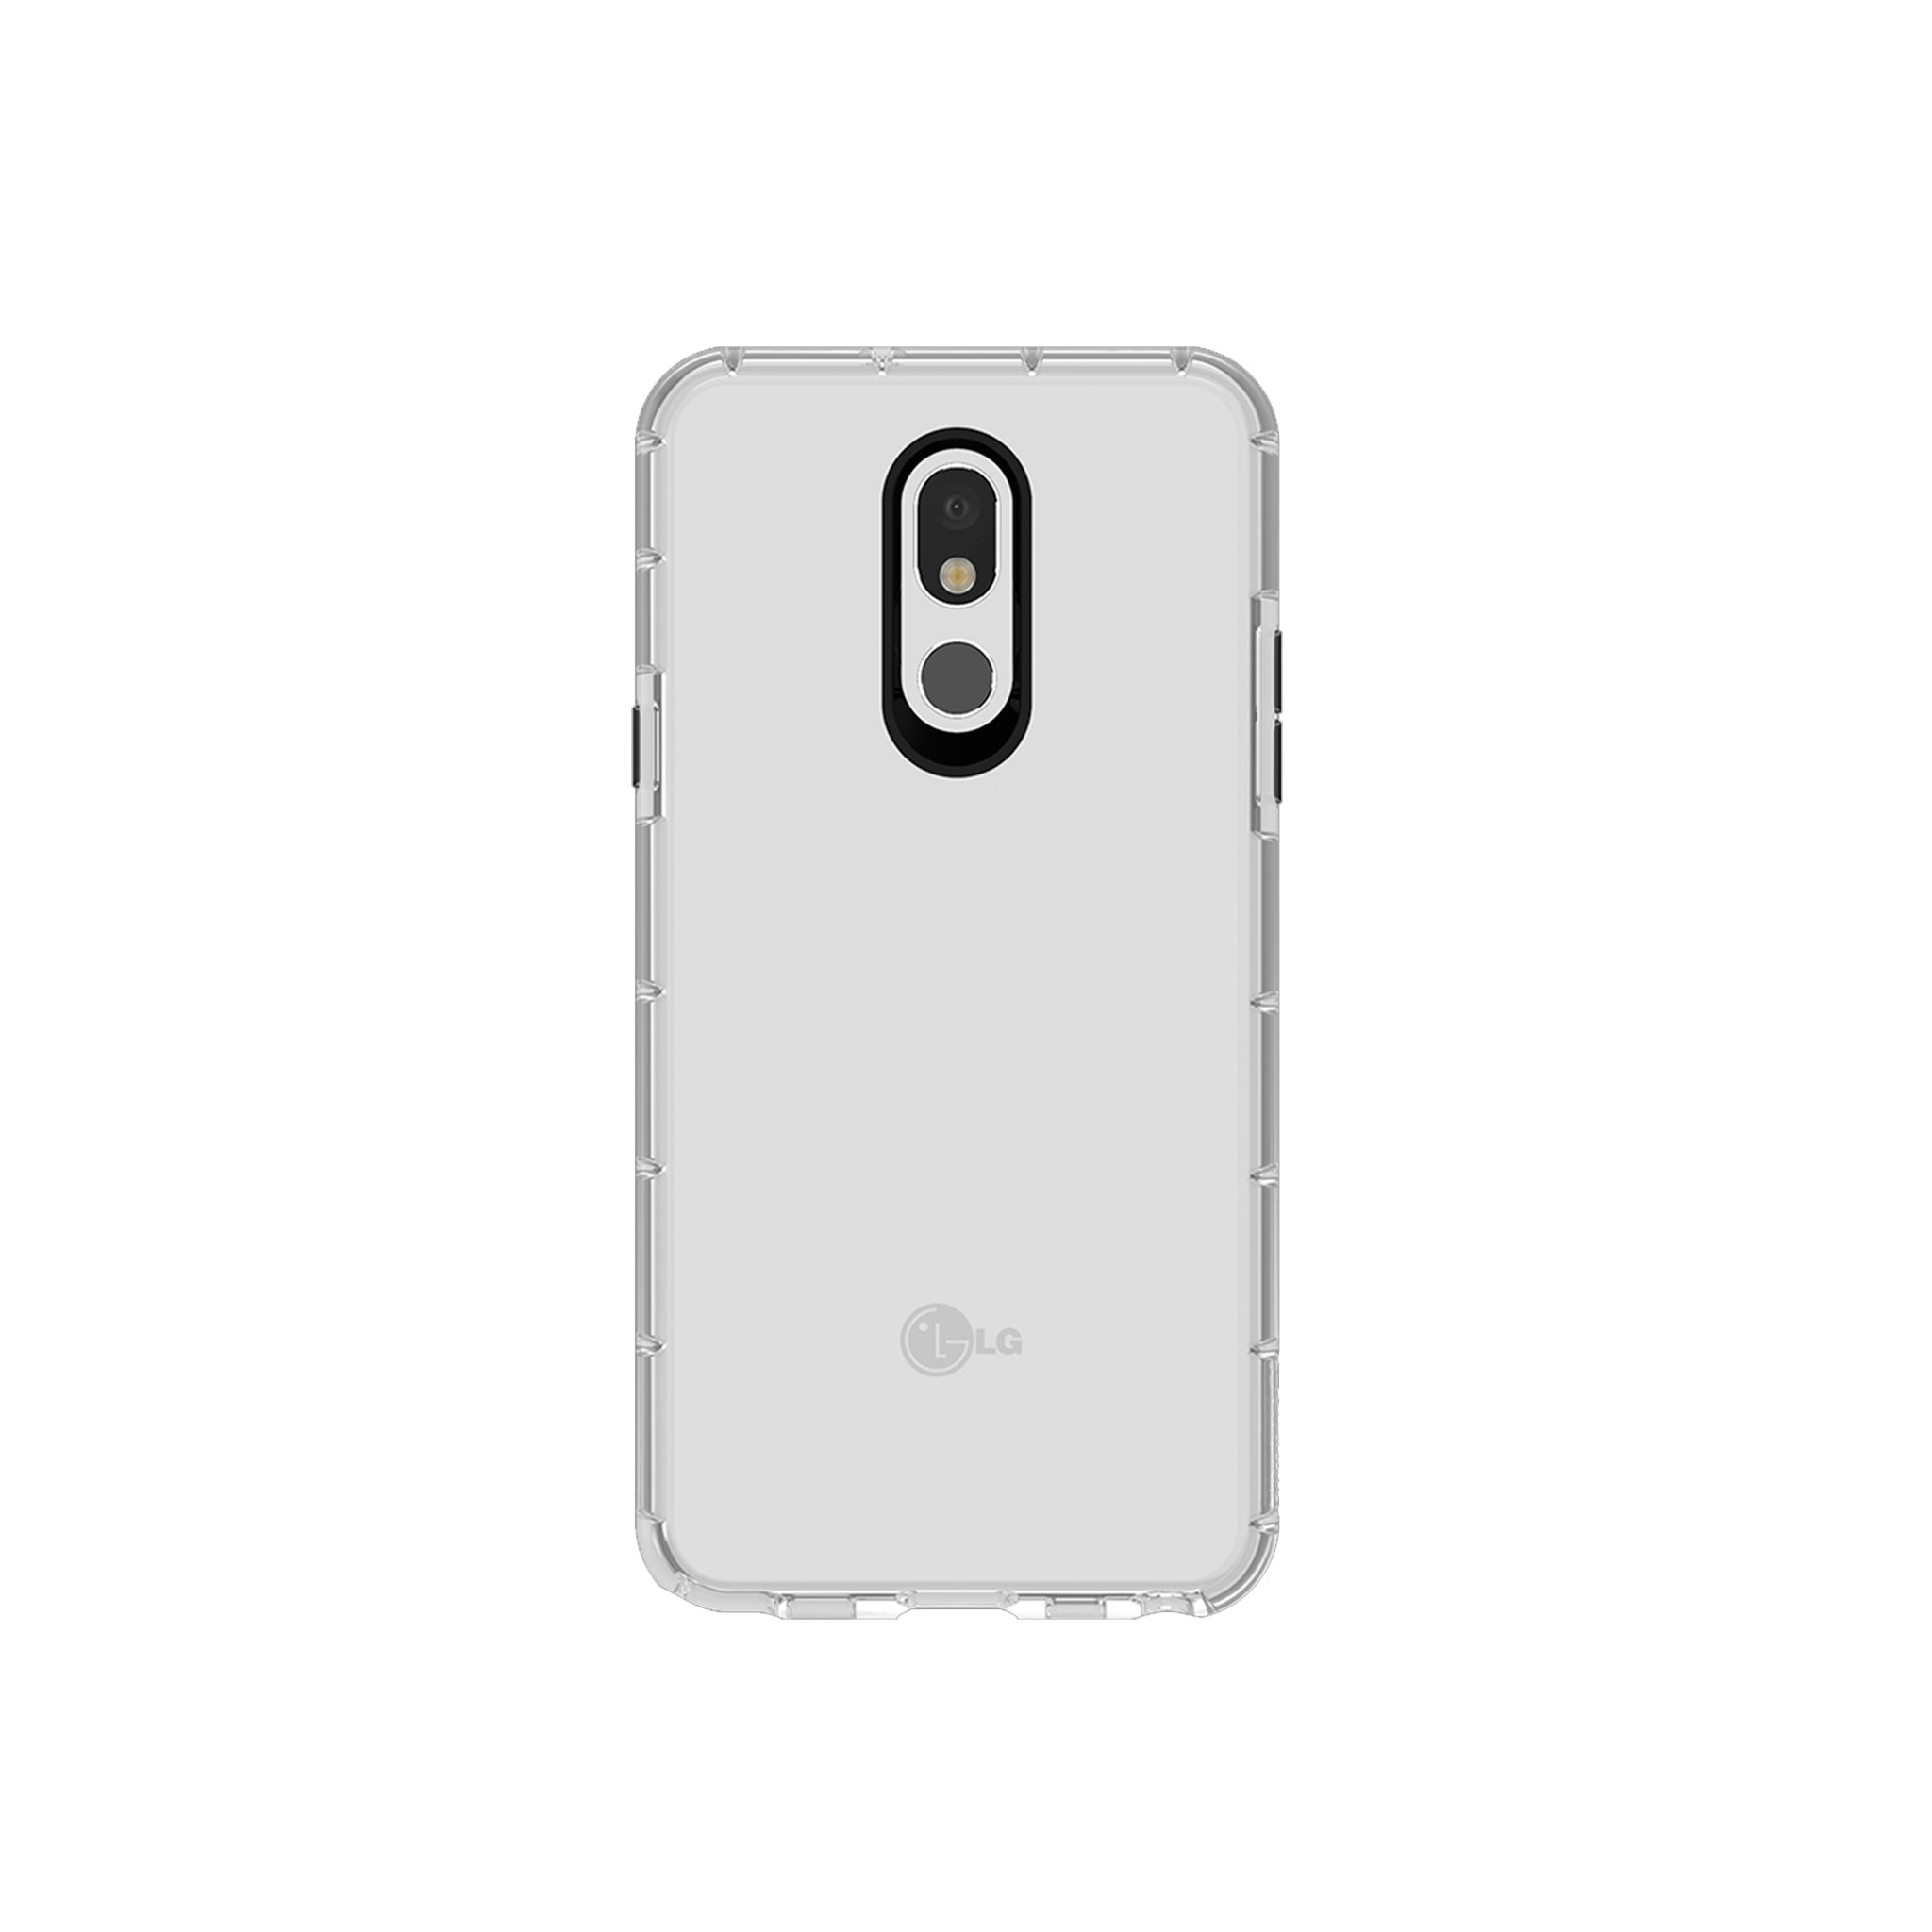 Nimbus9 - Vantage Case For Lg Stylo 5 - Just Clear